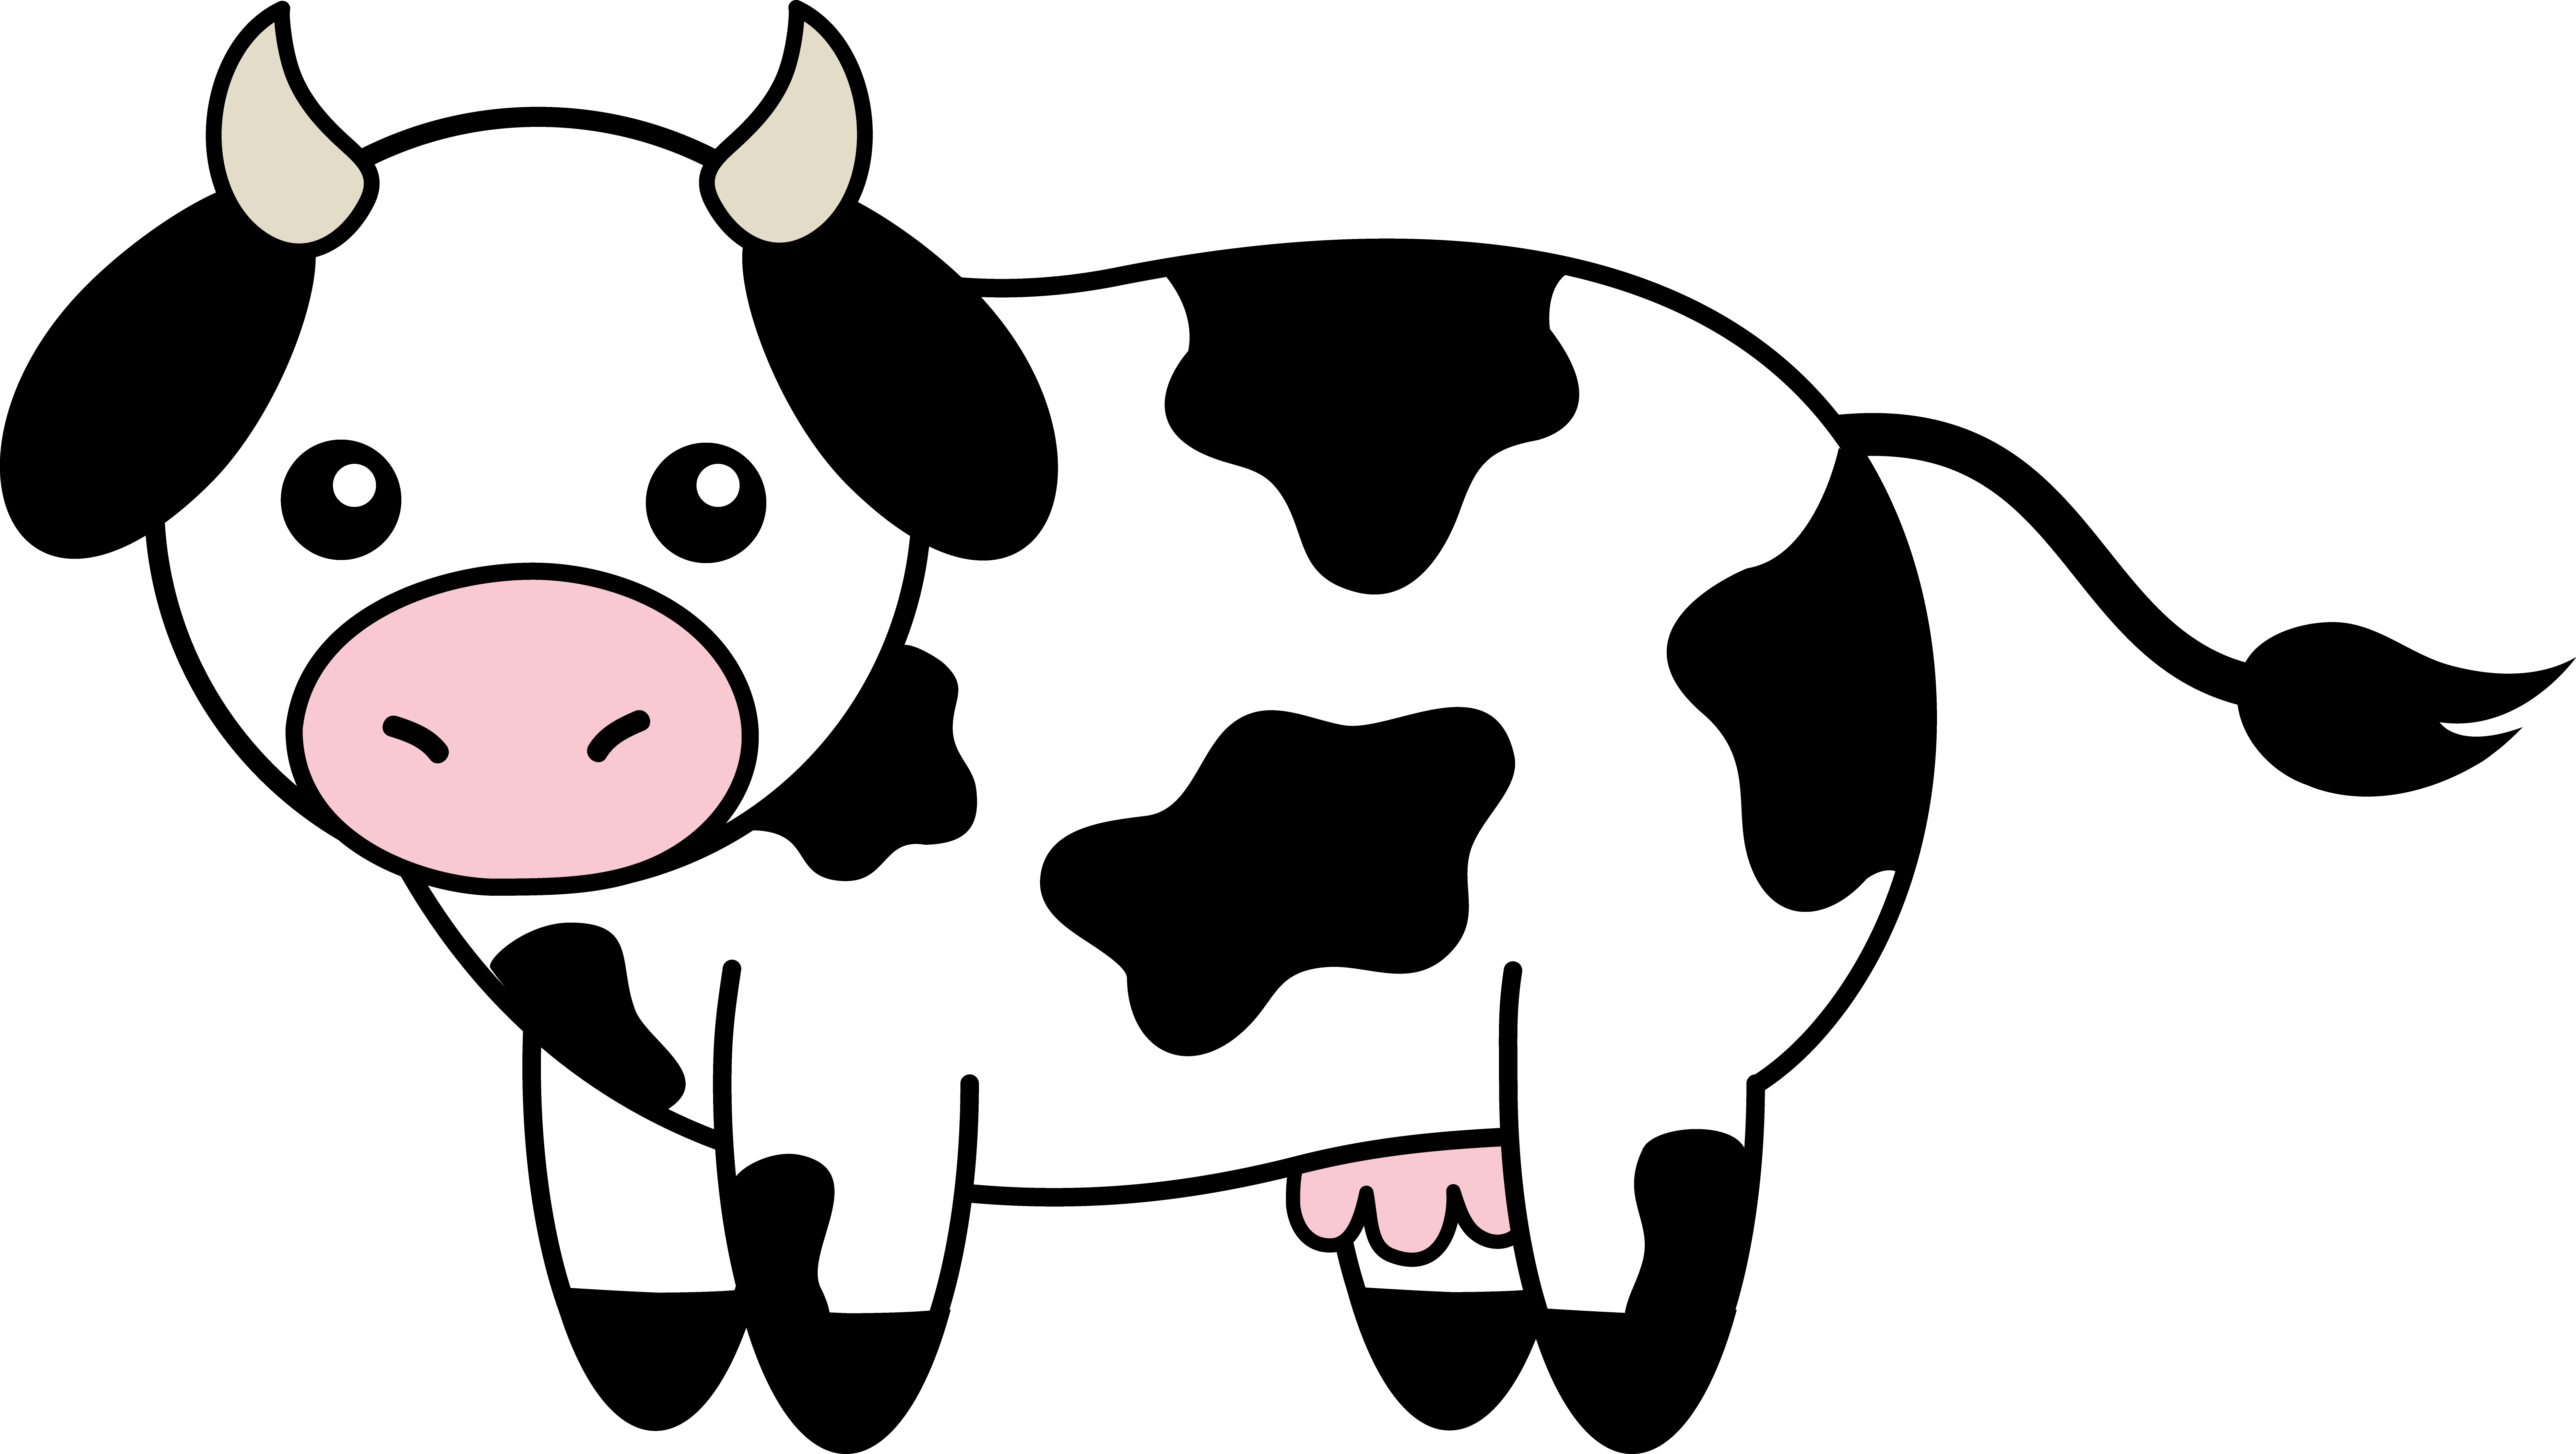 Black Cow Png Image Download 